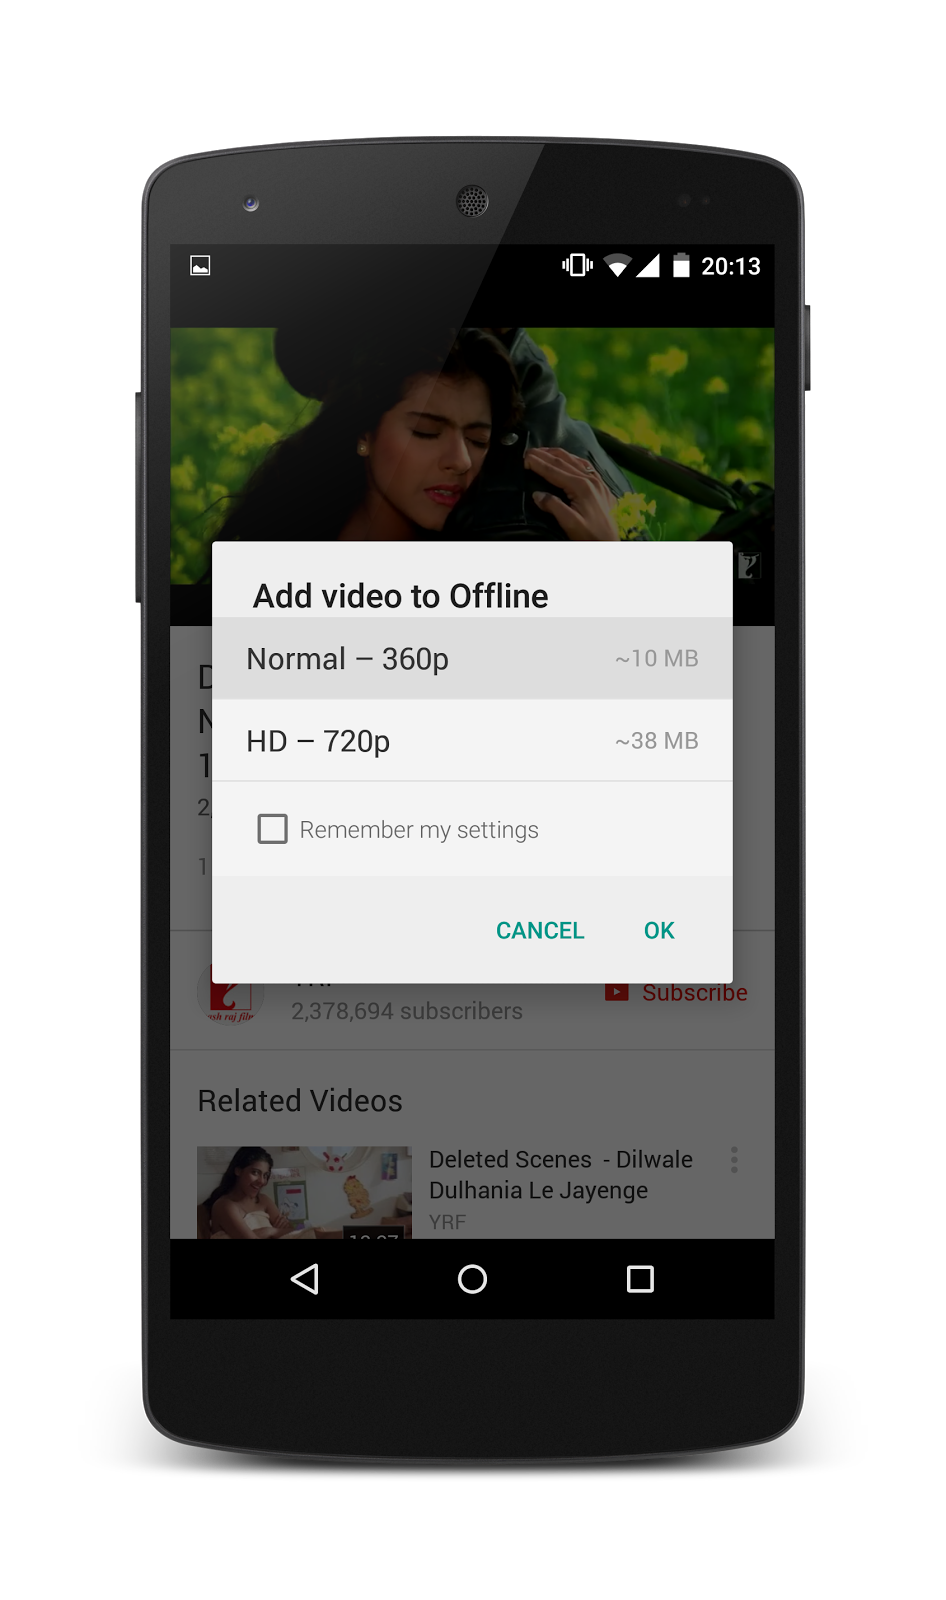 Youtube Offline Mode For Android And Ios Launched In India The Tech